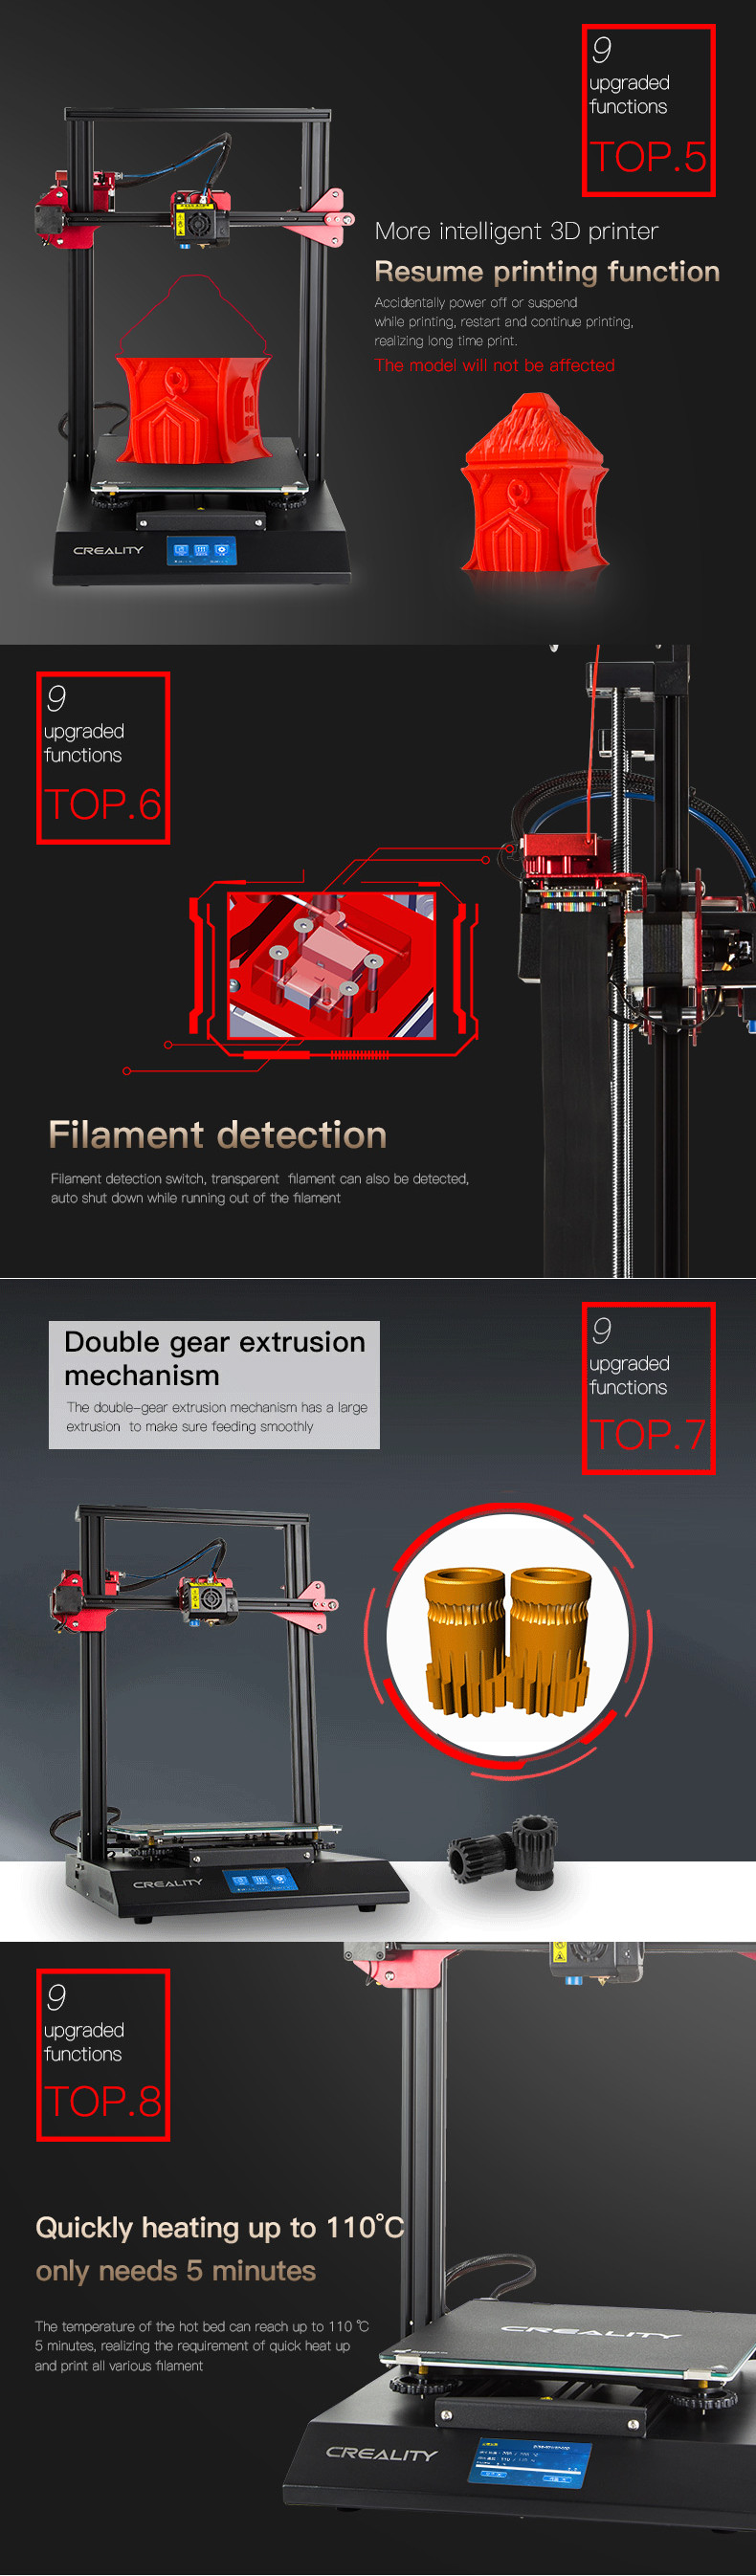 Creality 3D® CR-10S Pro DIY 3D Printer Kit 300*300*400mm Printing Size With Auto Leveling Sensor/Dual Gear Extrusion/4.3inch Touch LCD/Resume Printing 13